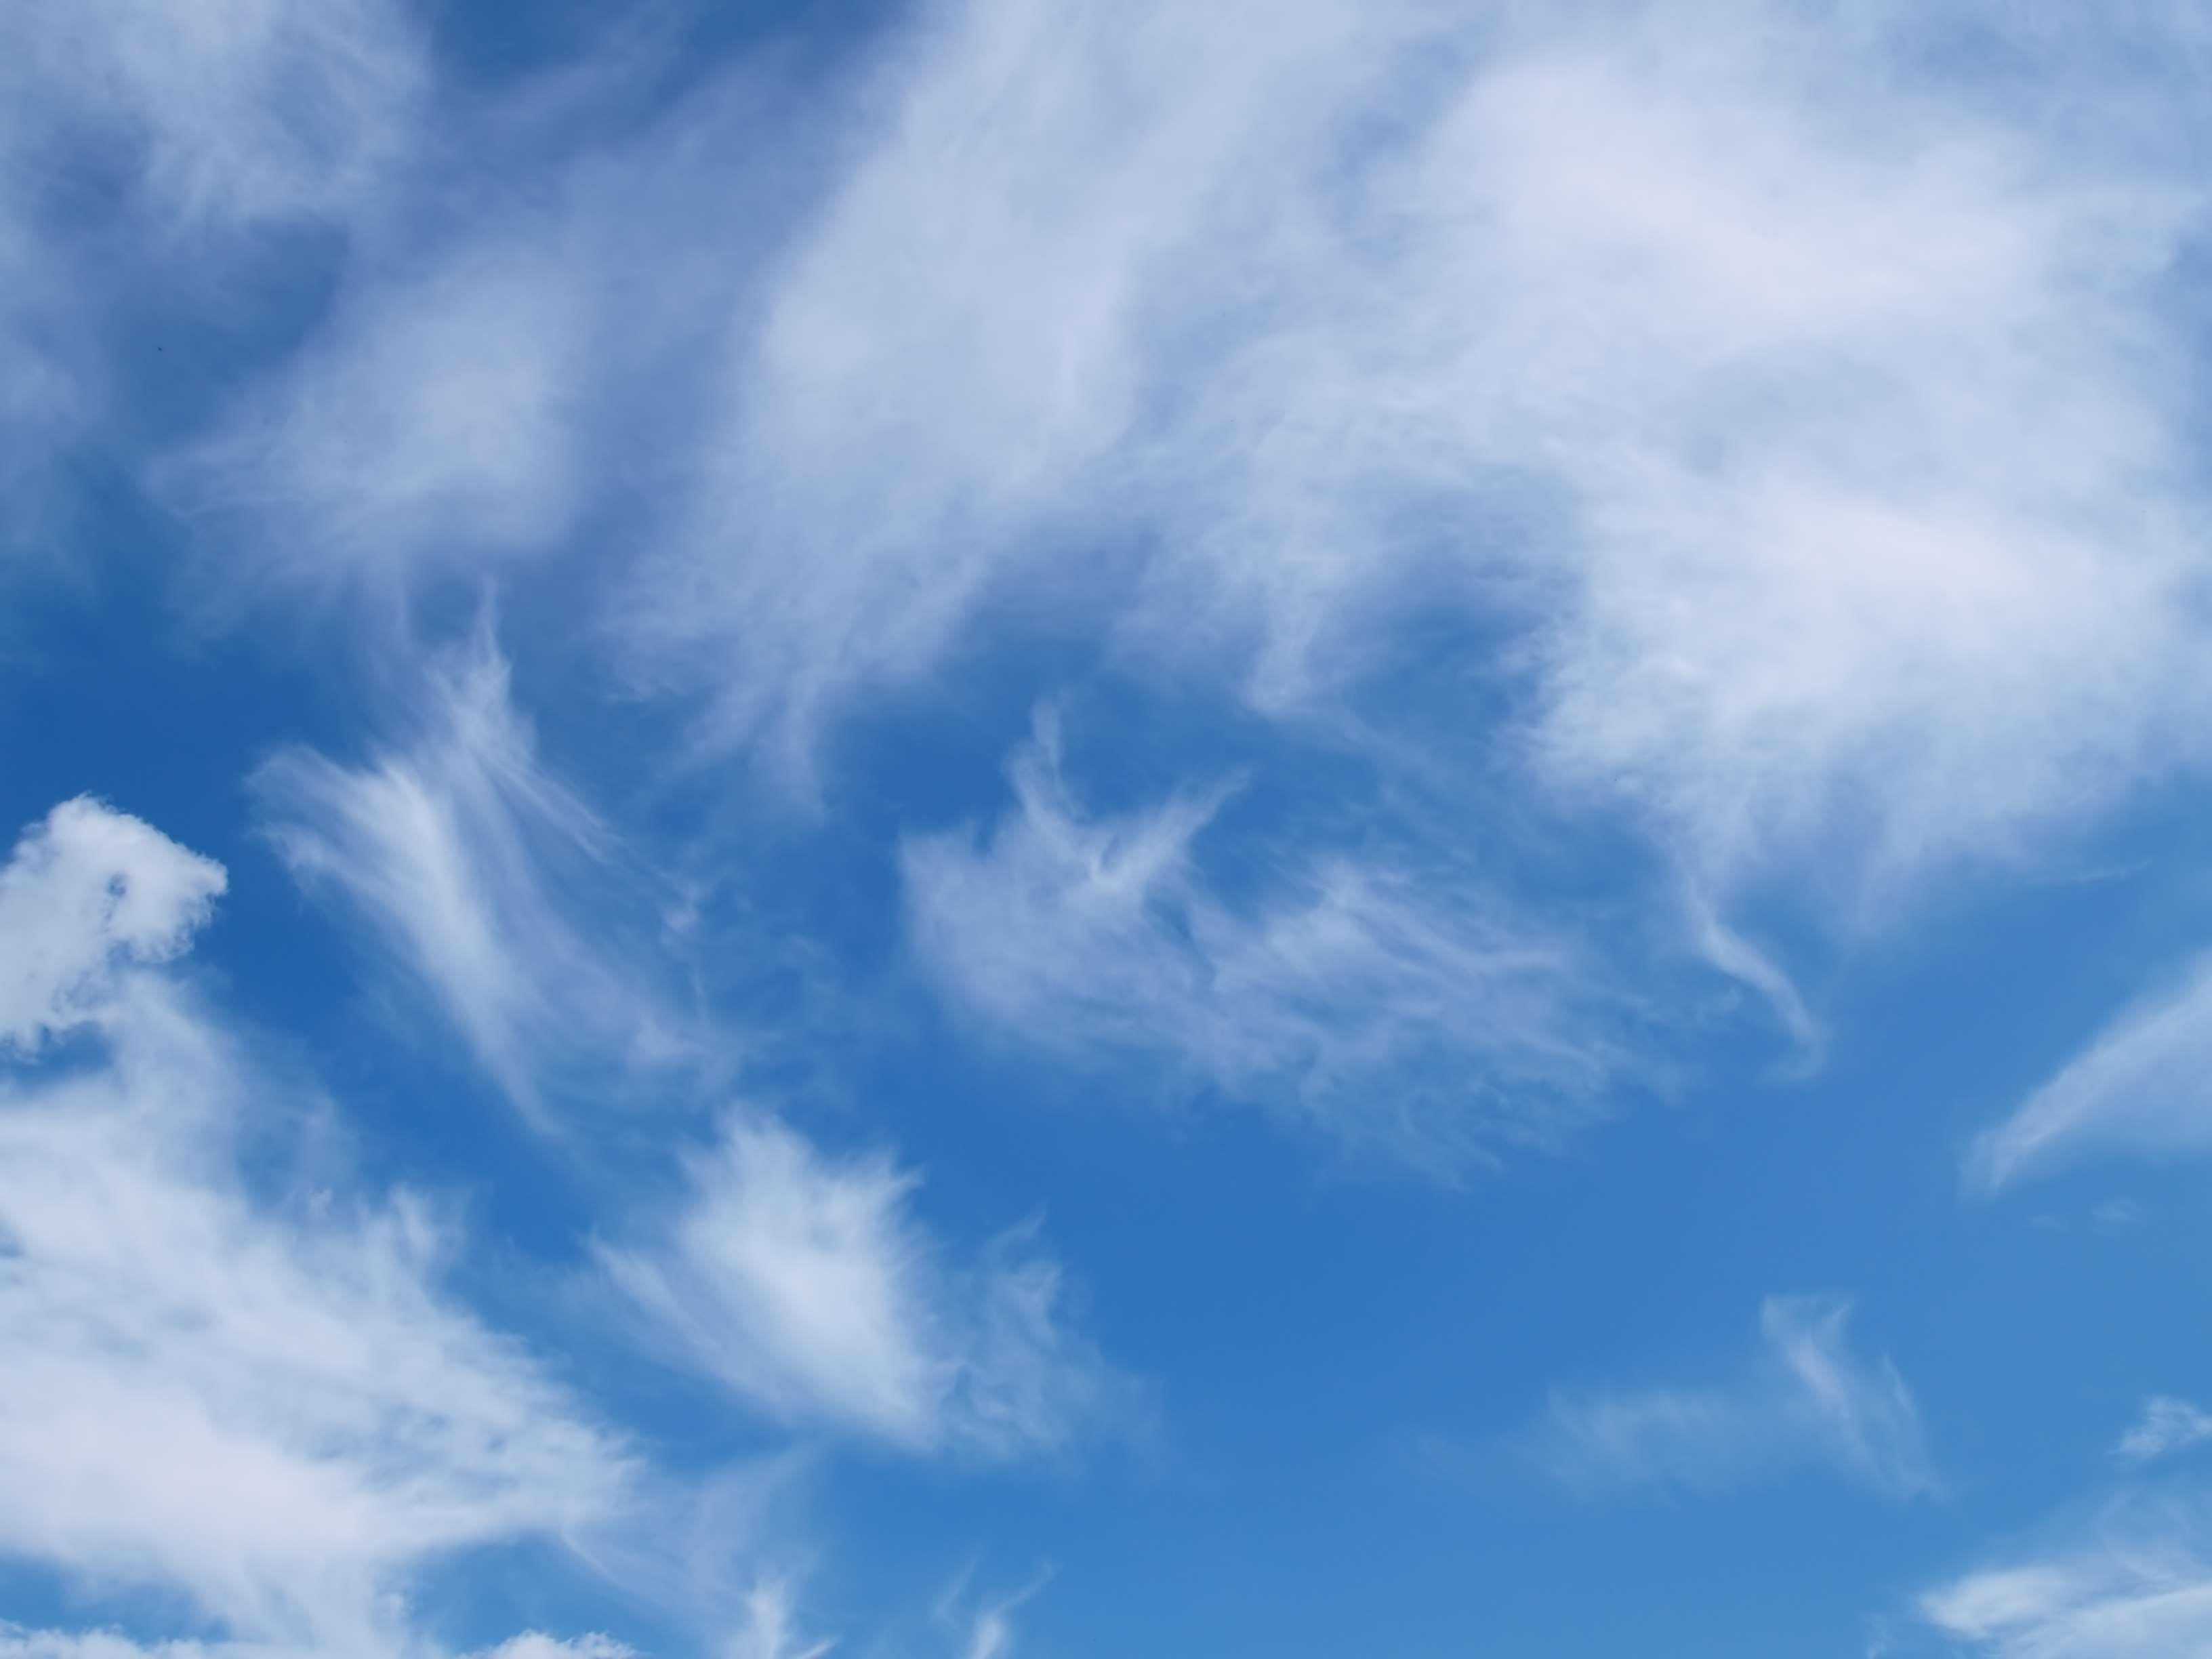 background image #backgrounds #blue #blue sky #cloud #clouds #cloudy ...